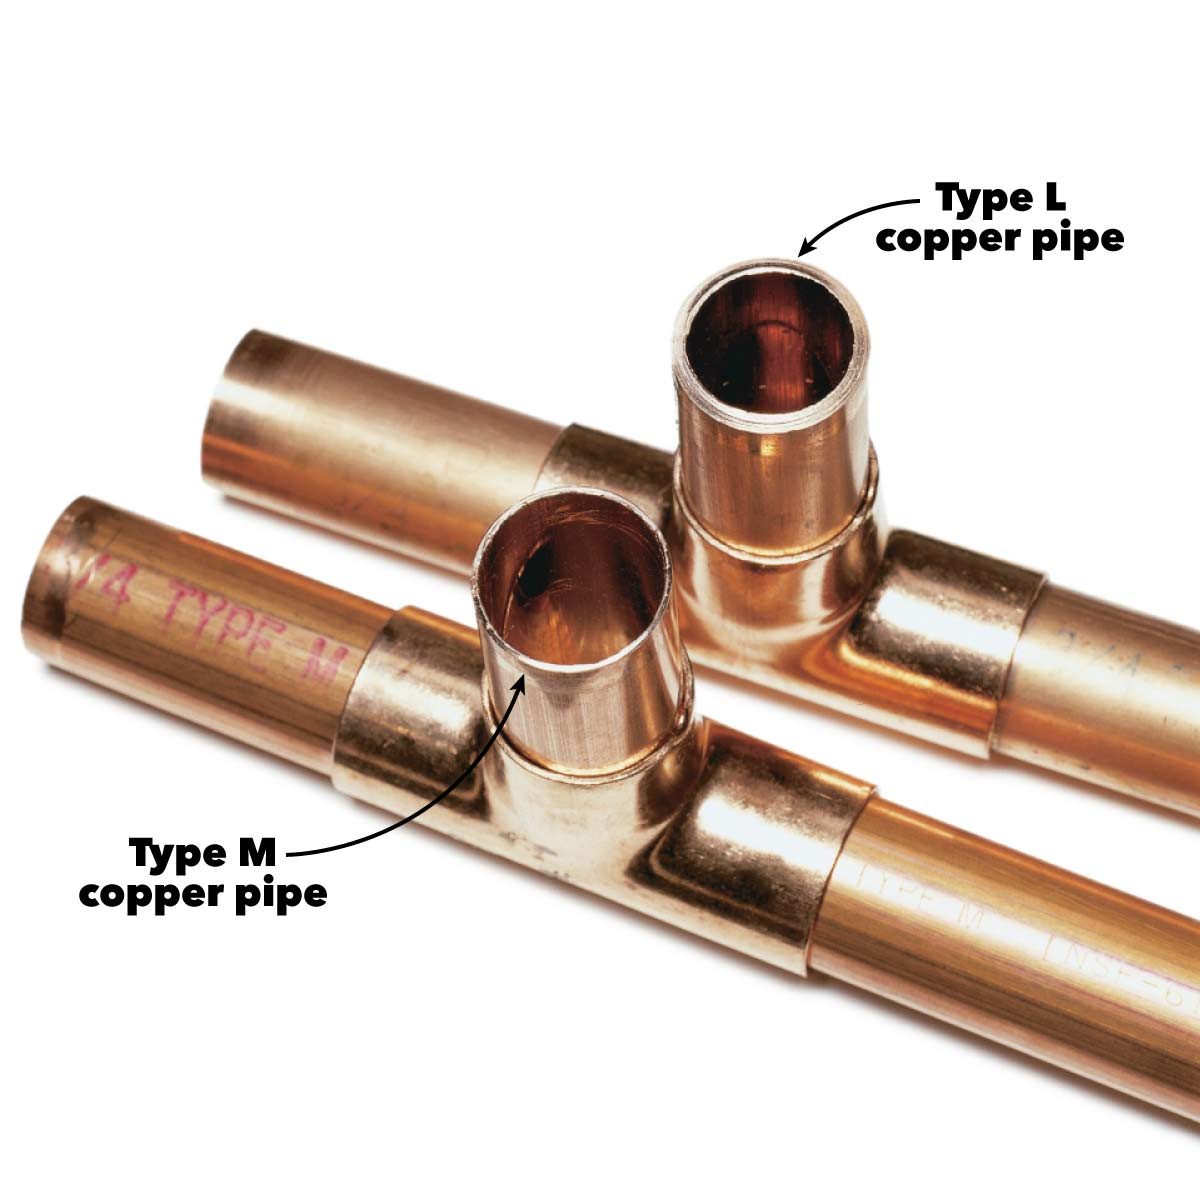 Copper Pipe Types: What's the difference? | Family Handyman